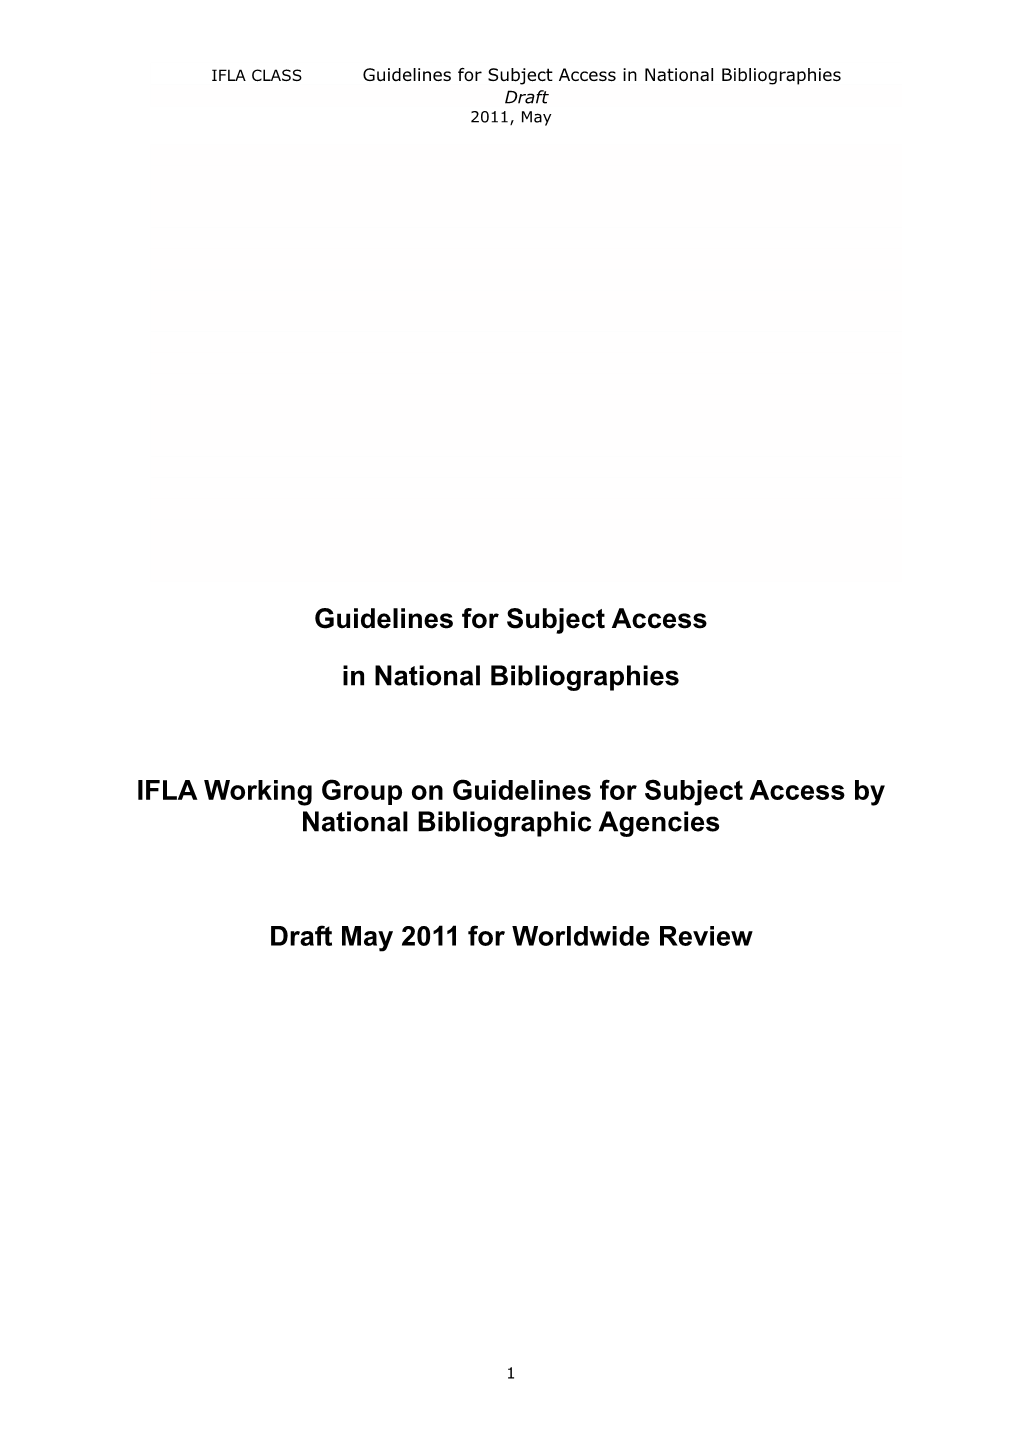 Guidelines for Subject Access in National Bibliographies Draft 2011, May